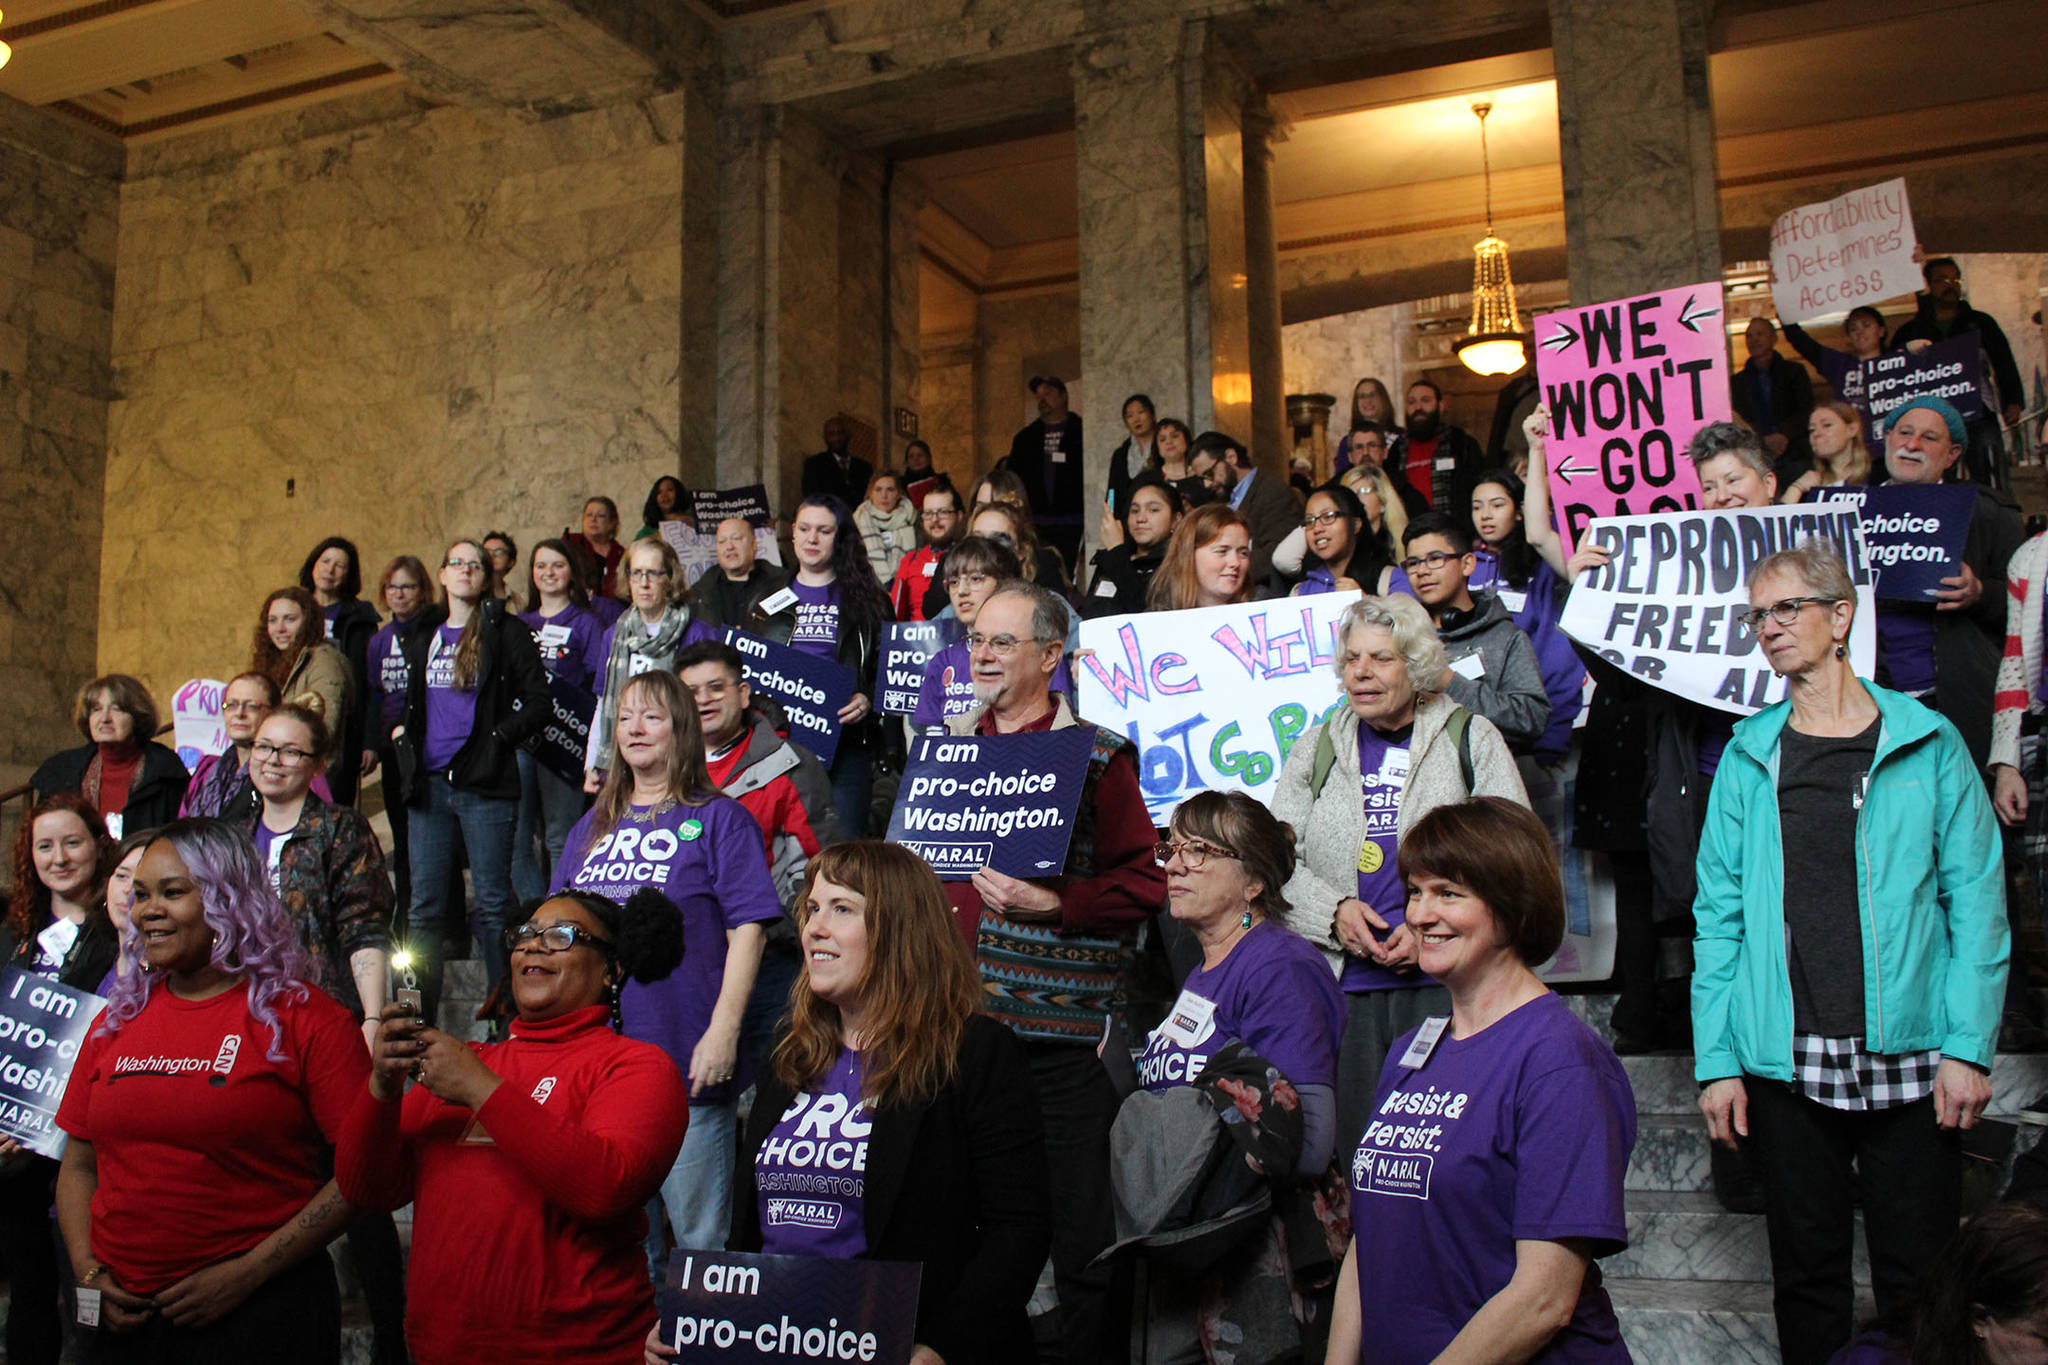 Nearly 100 people gathered in the Capitol Legislative Building in Olympia on Thursday, Jan. 18, to rally in support of the Reproductive Parity Act and other women’s health bills. Photo by Taylor McAvoy